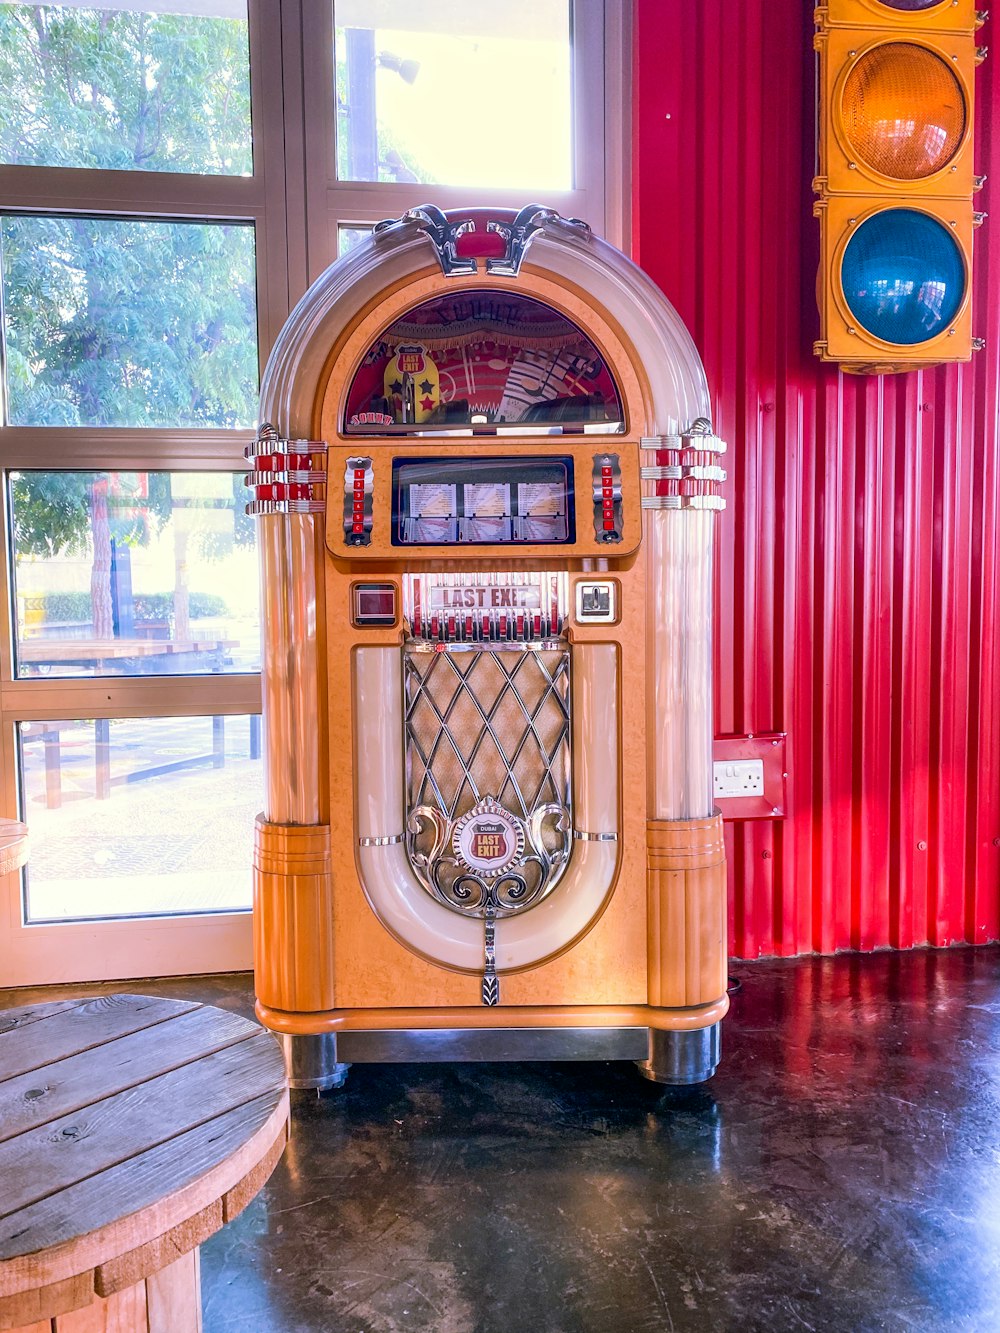 a jukebox sitting in front of a window next to a traffic light